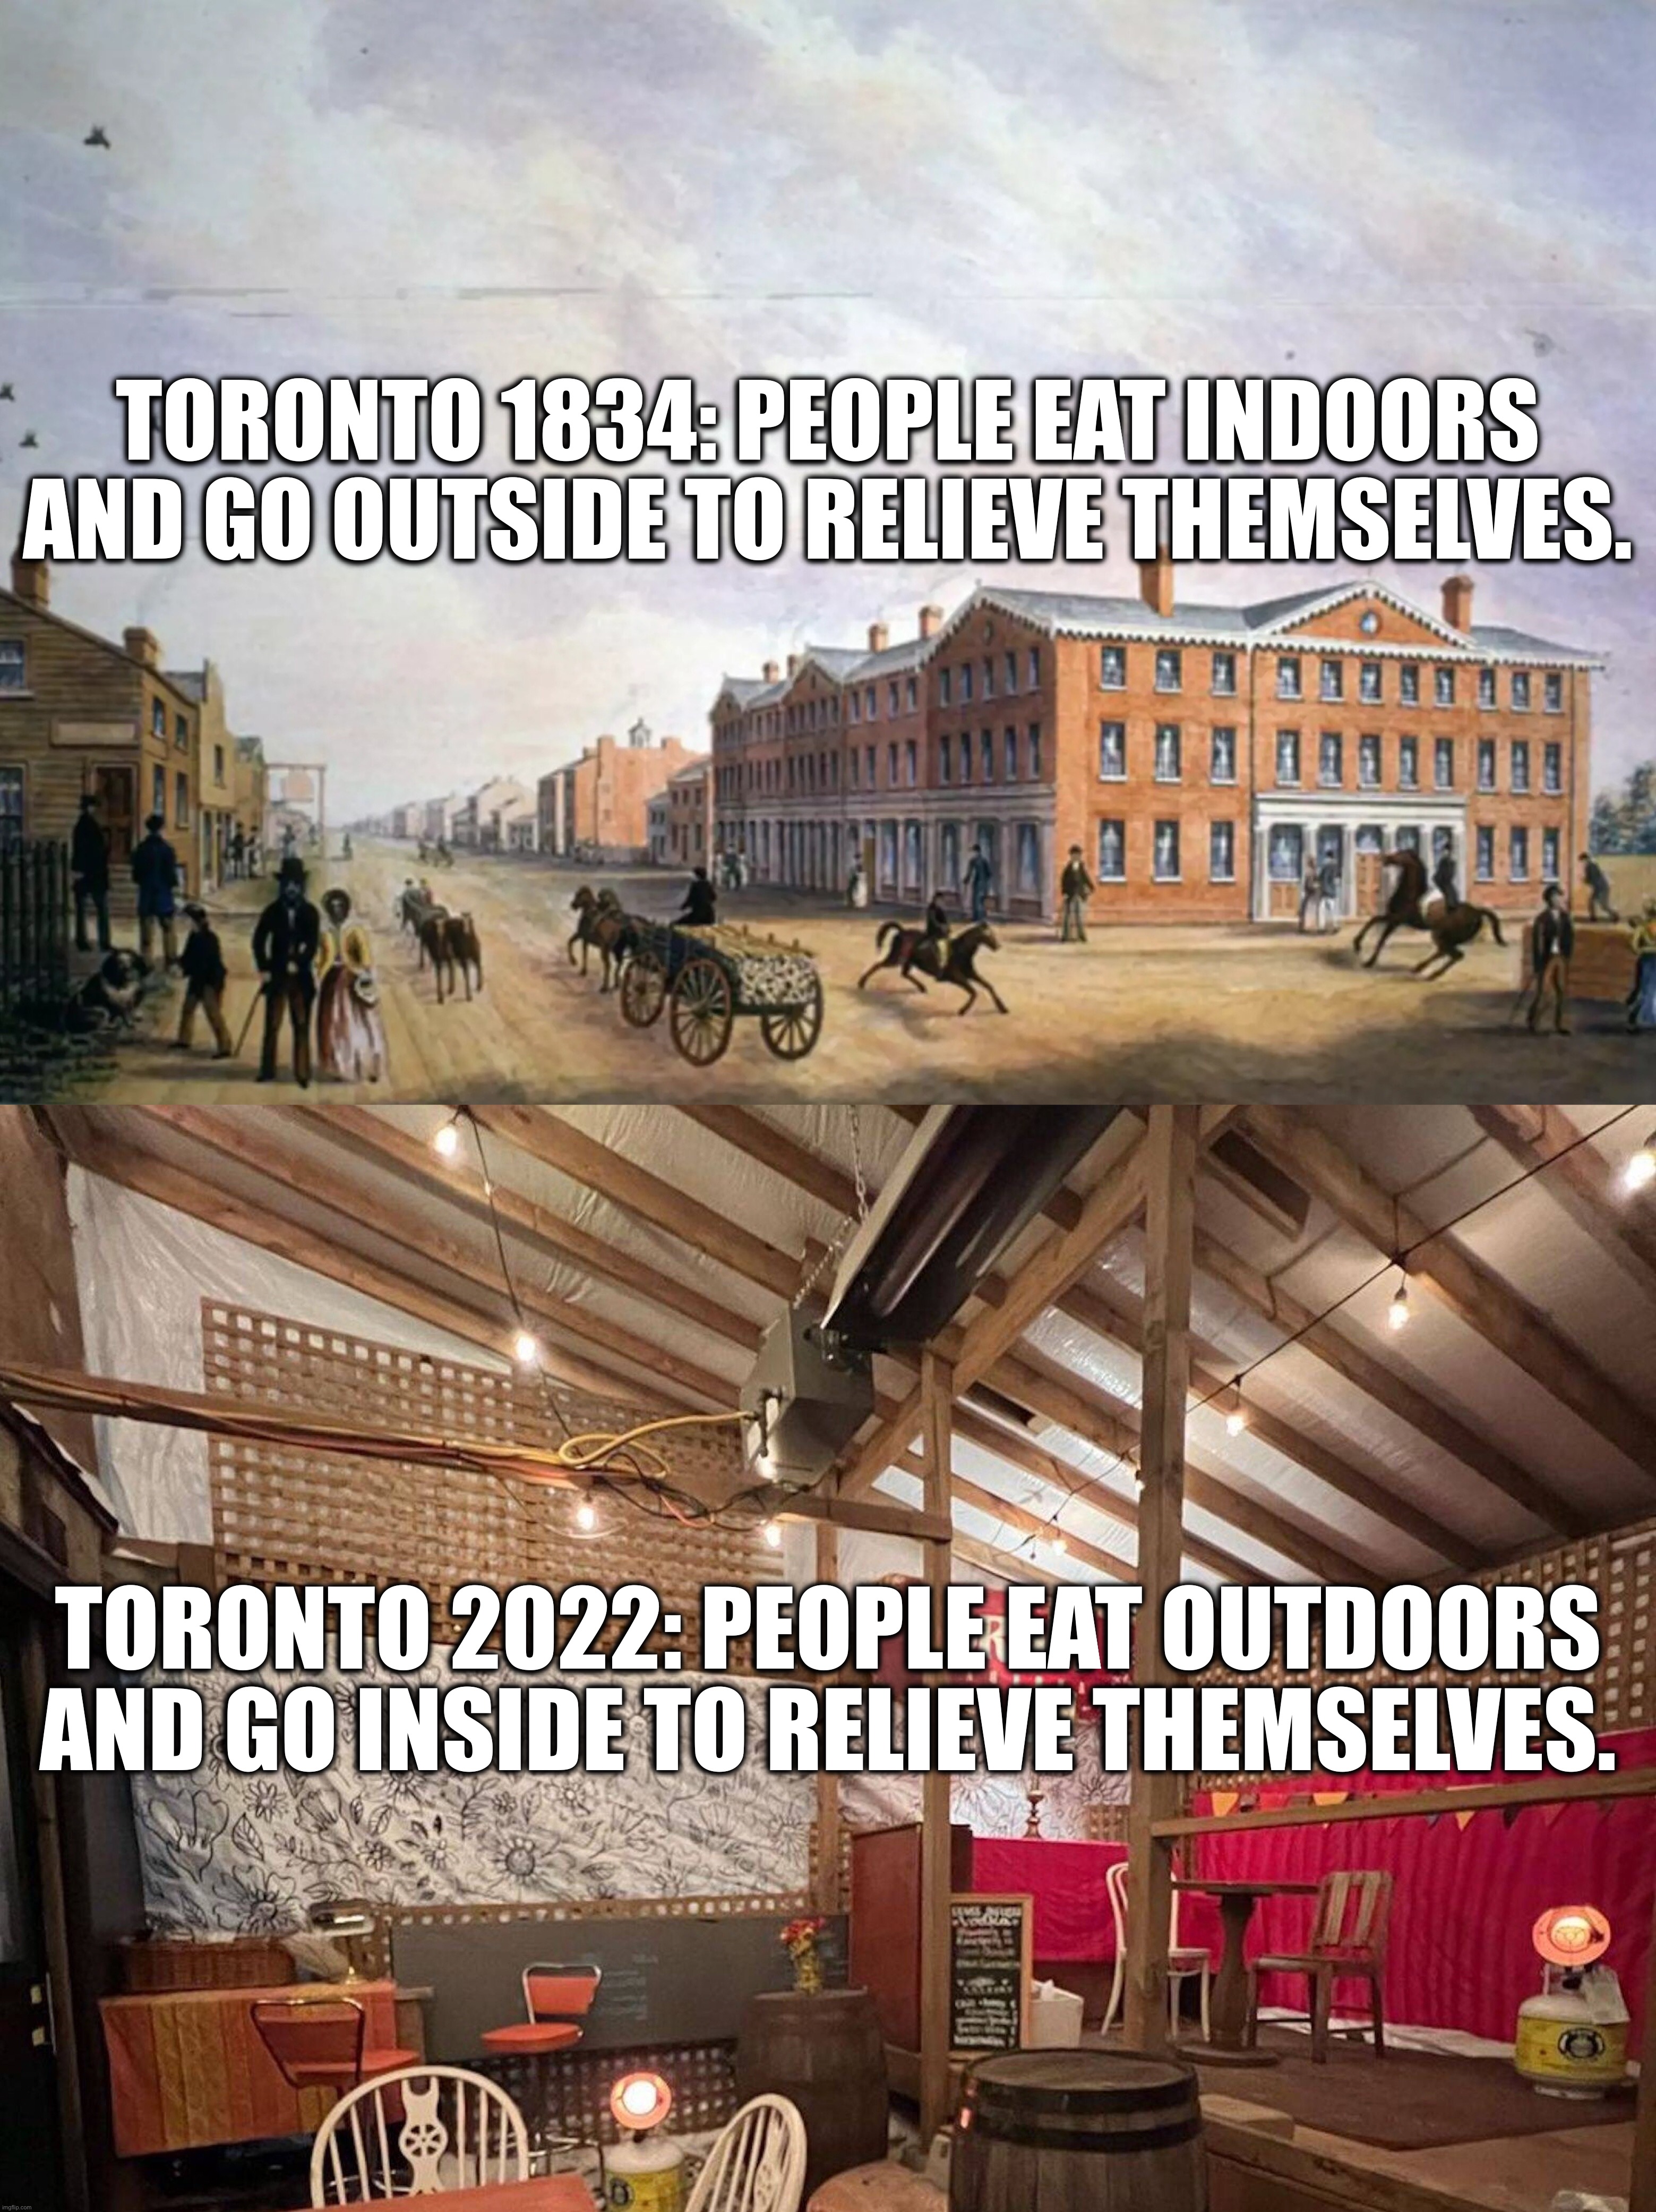 Progress… | TORONTO 1834: PEOPLE EAT INDOORS AND GO OUTSIDE TO RELIEVE THEMSELVES. TORONTO 2022: PEOPLE EAT OUTDOORS AND GO INSIDE TO RELIEVE THEMSELVES. | image tagged in toronto,meanwhile in canada,new world order,covid-19,vaccines,memes | made w/ Imgflip meme maker